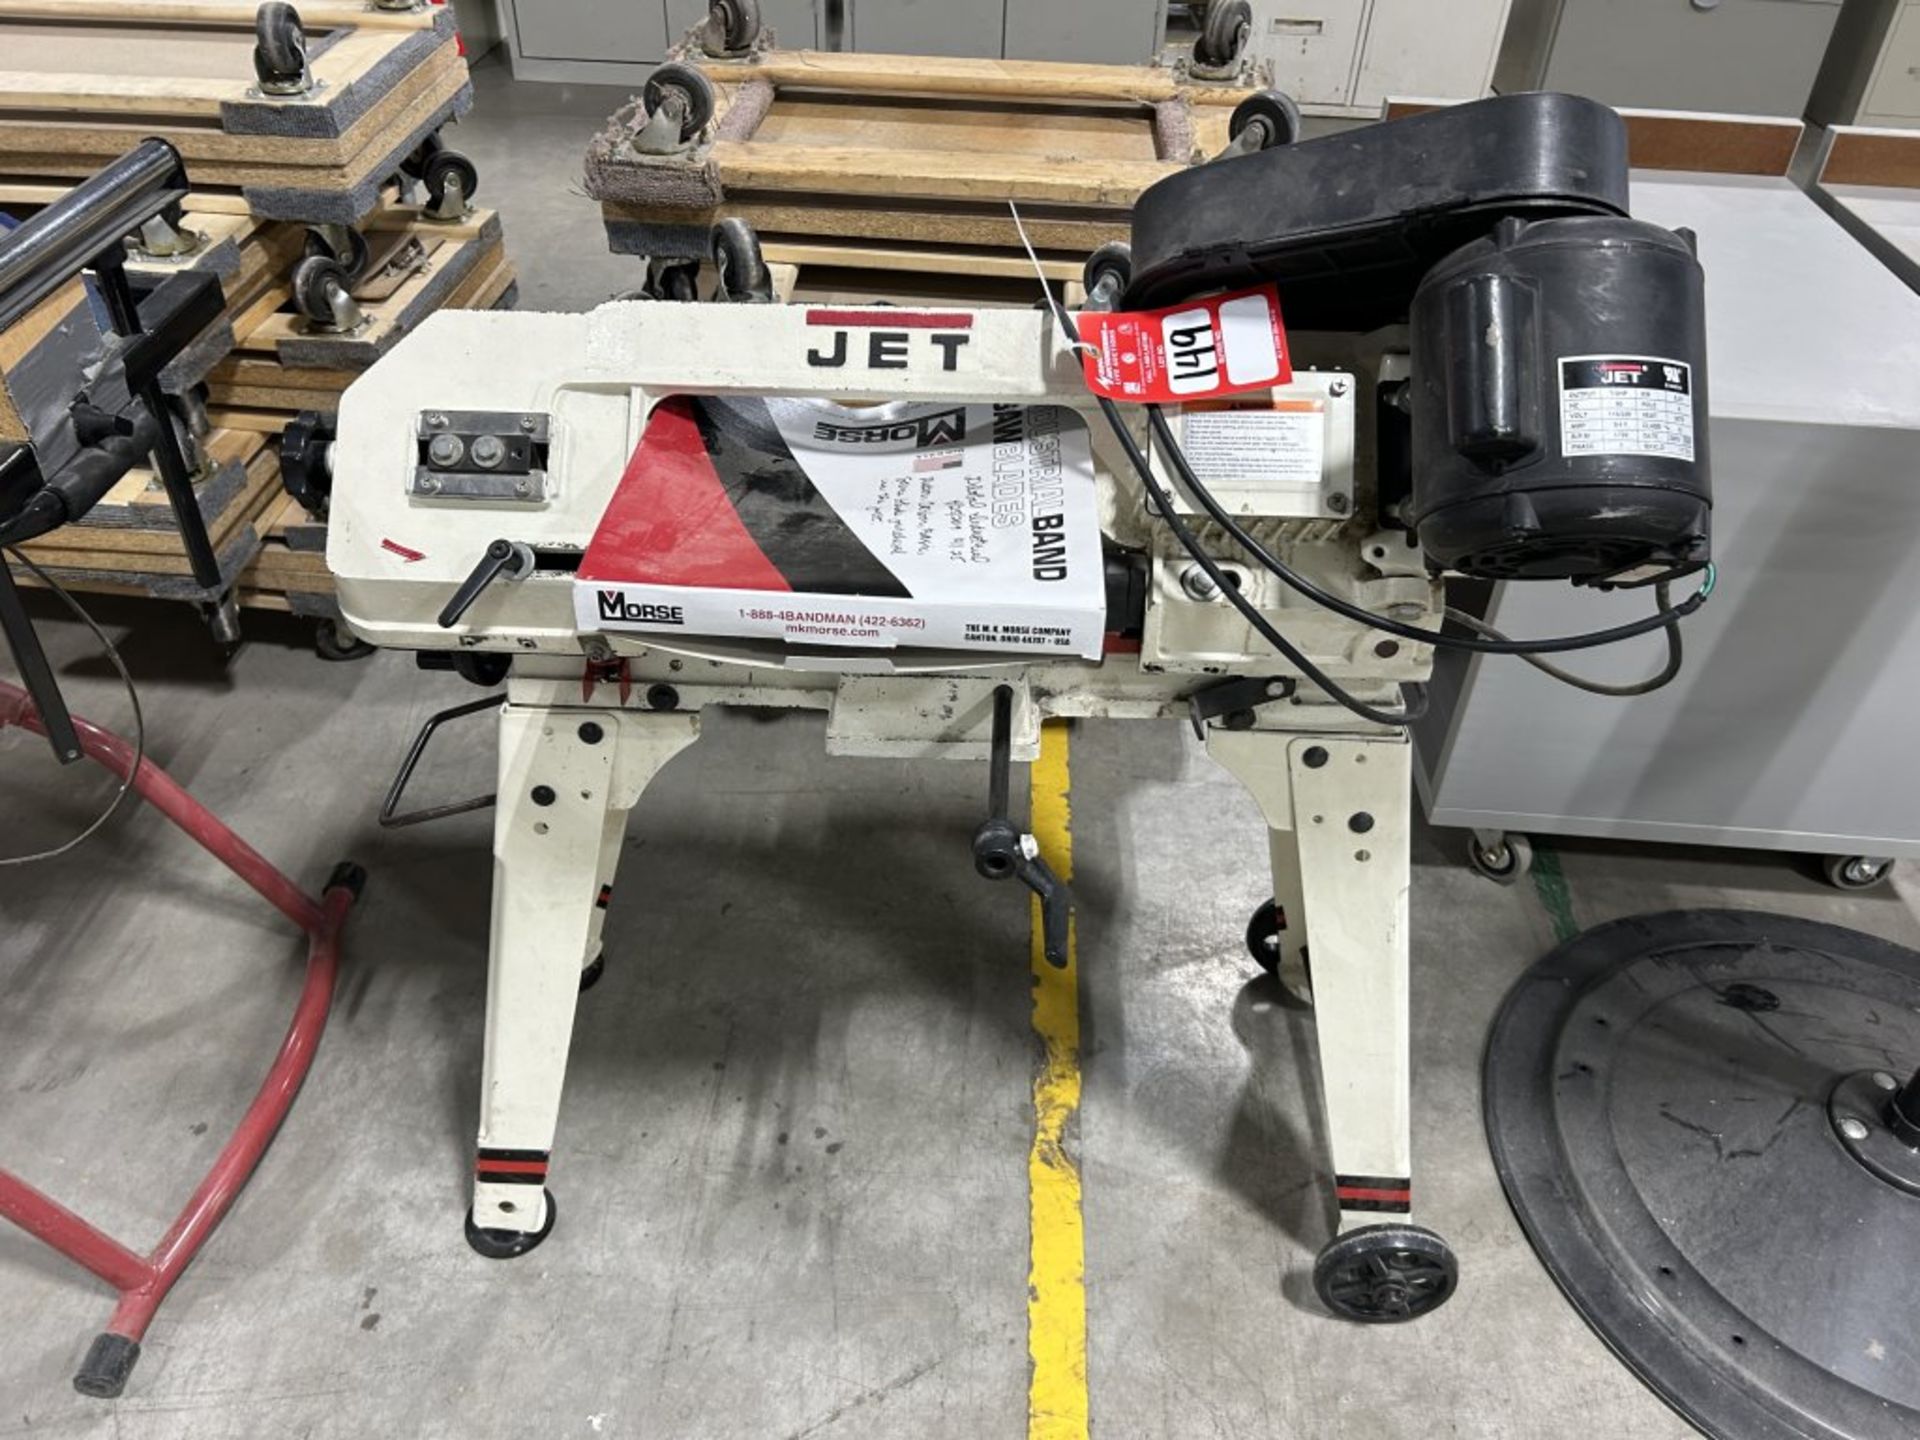 JET METAL CUTTING BAND SAW, 1/2 HP MOTOR, WITH SPARE BLADE